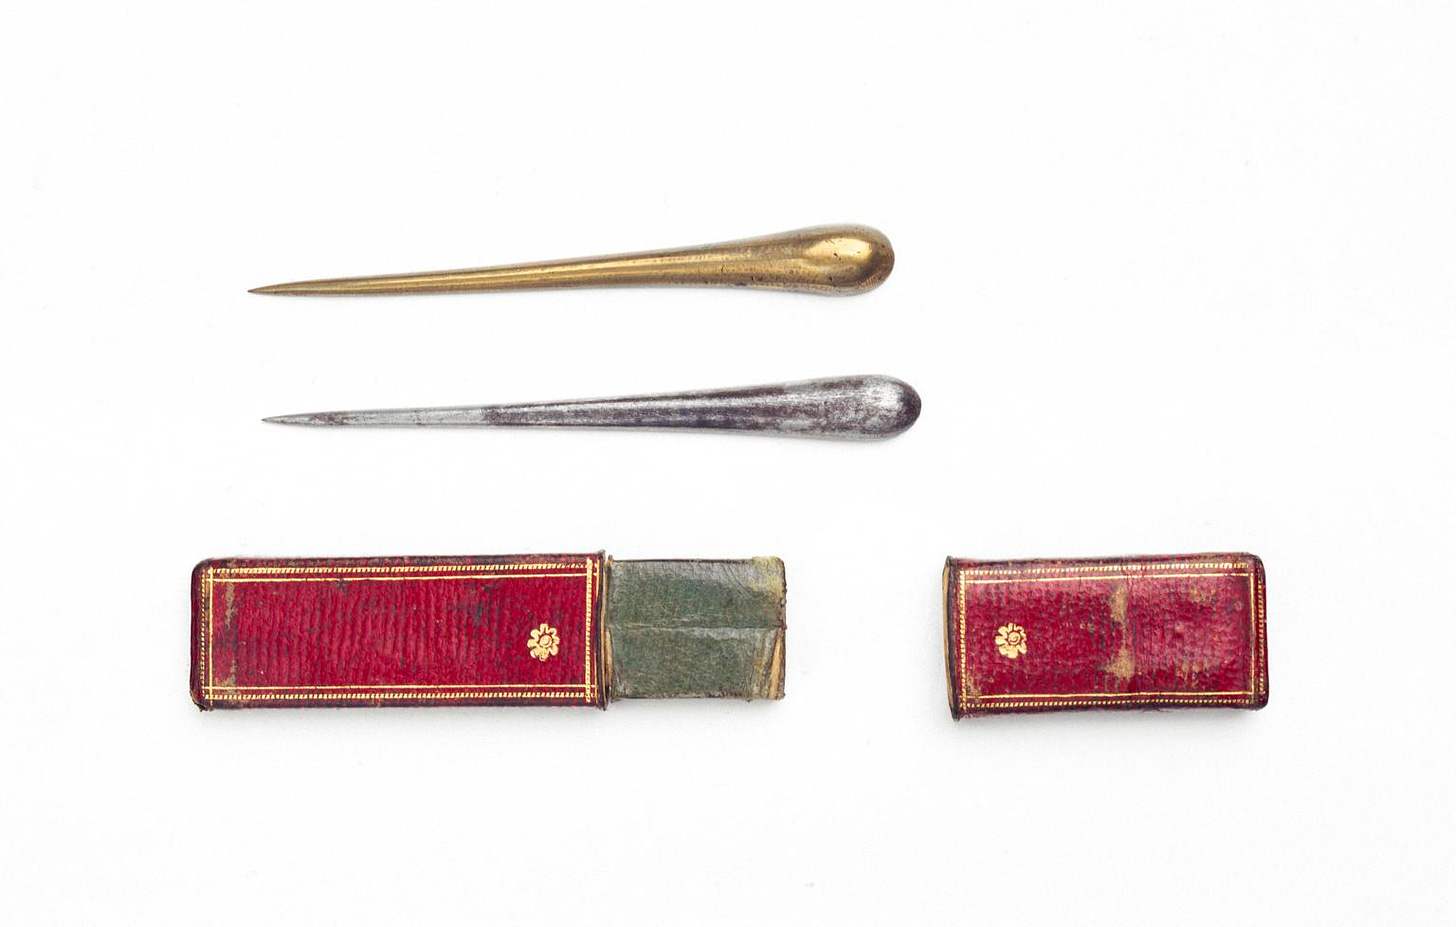 The picture shows two metal prongs, each with a pointed end and a rounded end. They appear to be made from different metals. Below them is a red leather case, in which they would have been carried.